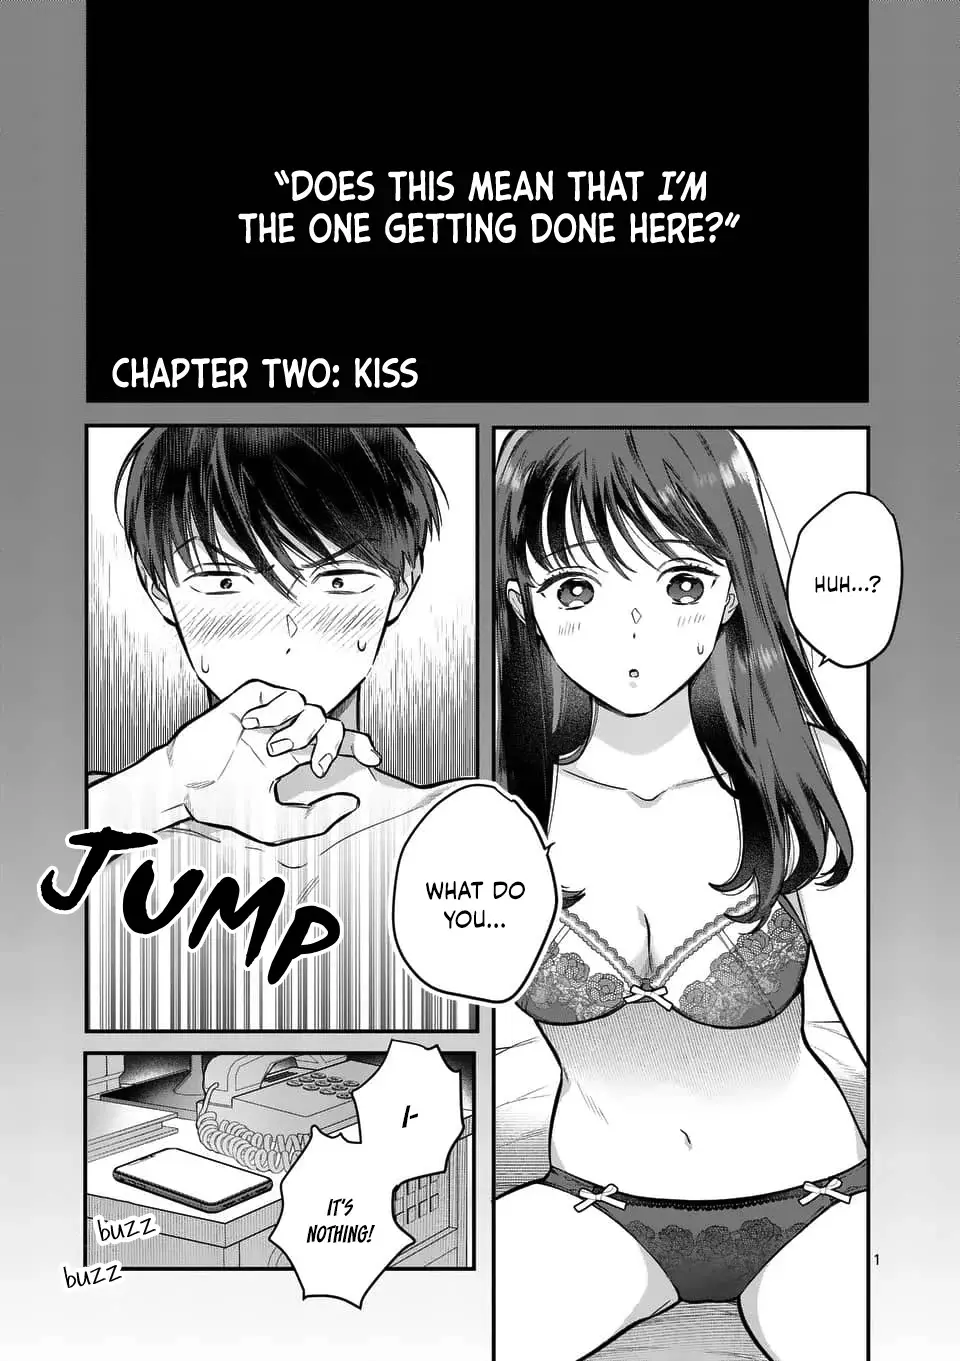 Is It Wrong To Get Done By A Girl? - 2 page 2